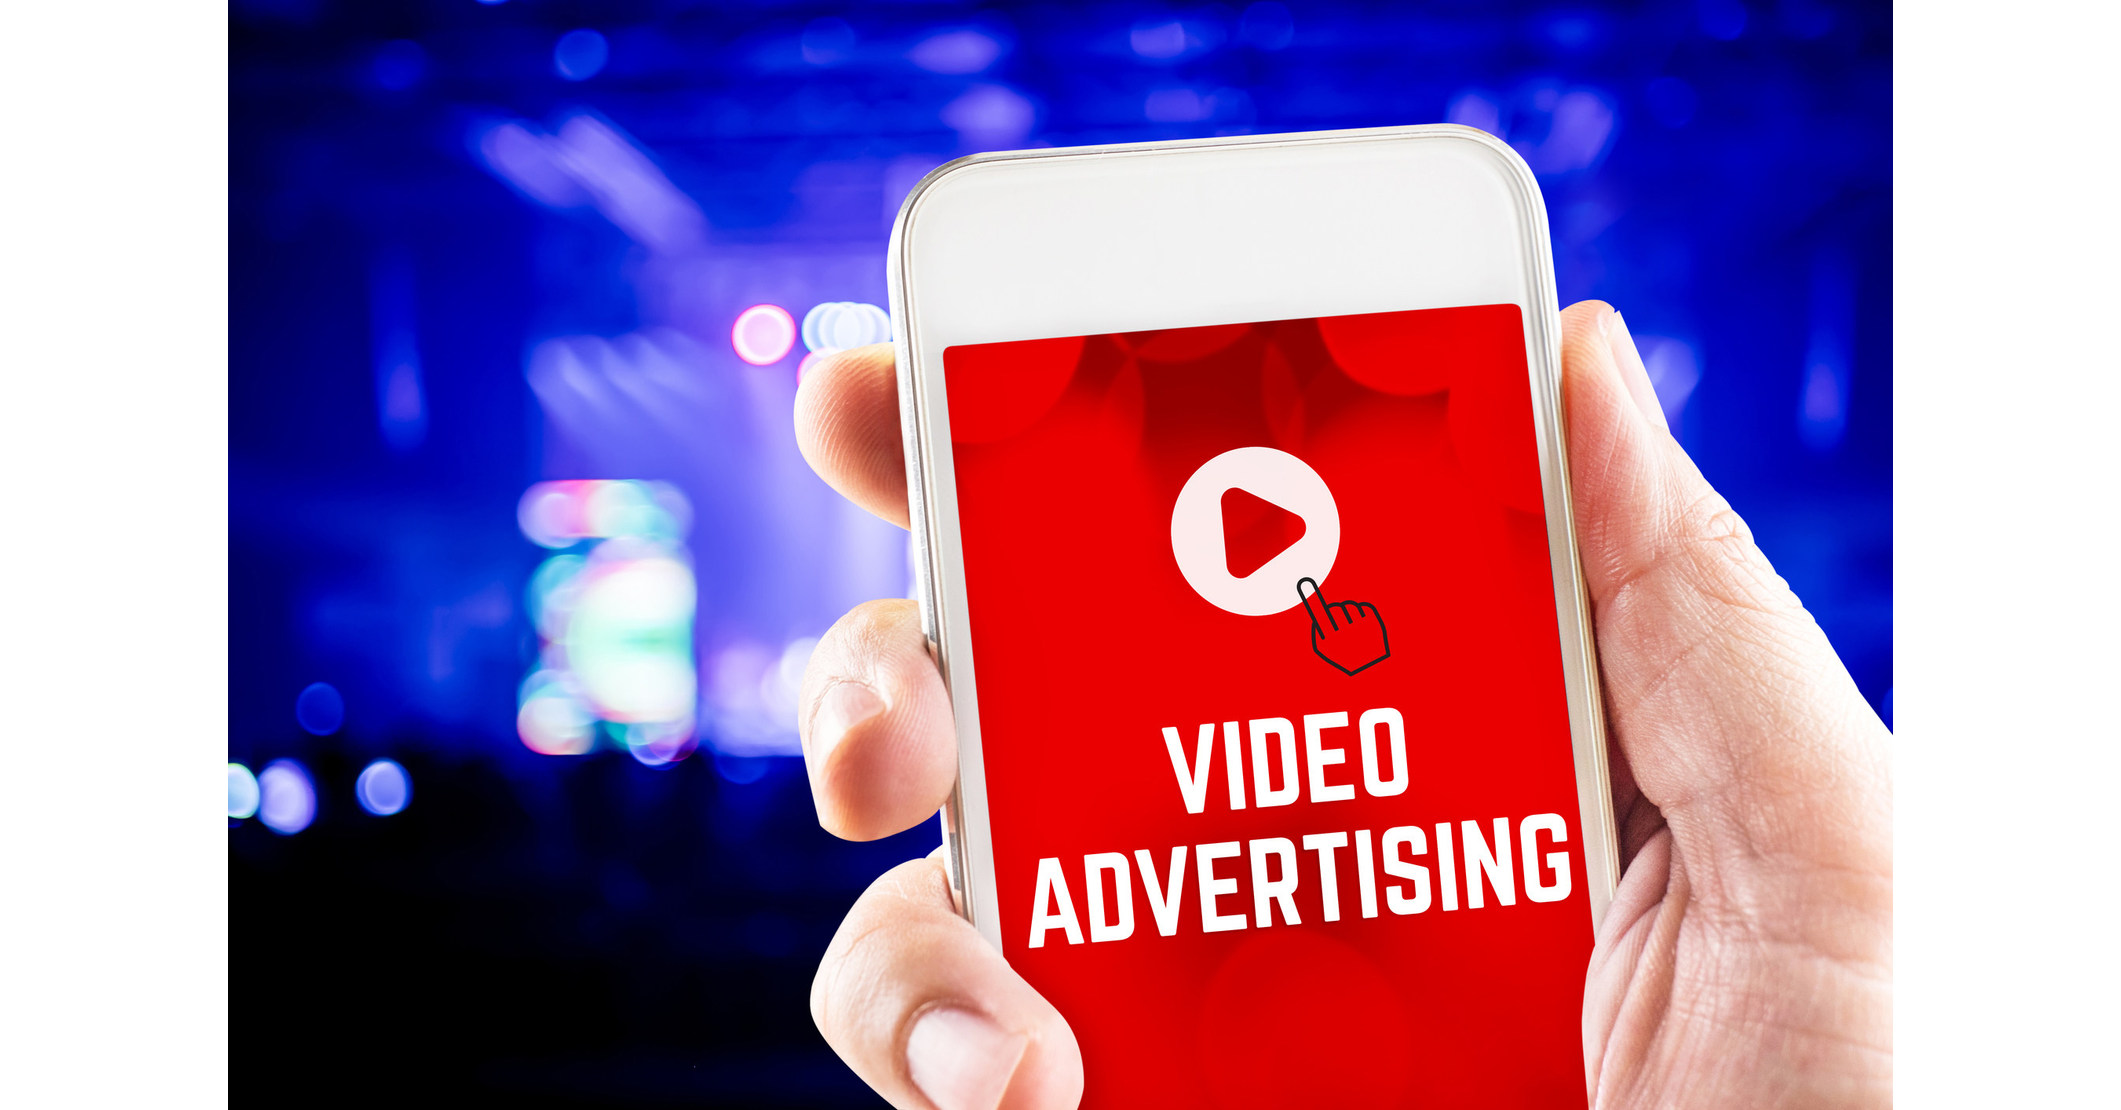 Mobile Video advertising. Video advertising. Video ads. Mobile channel